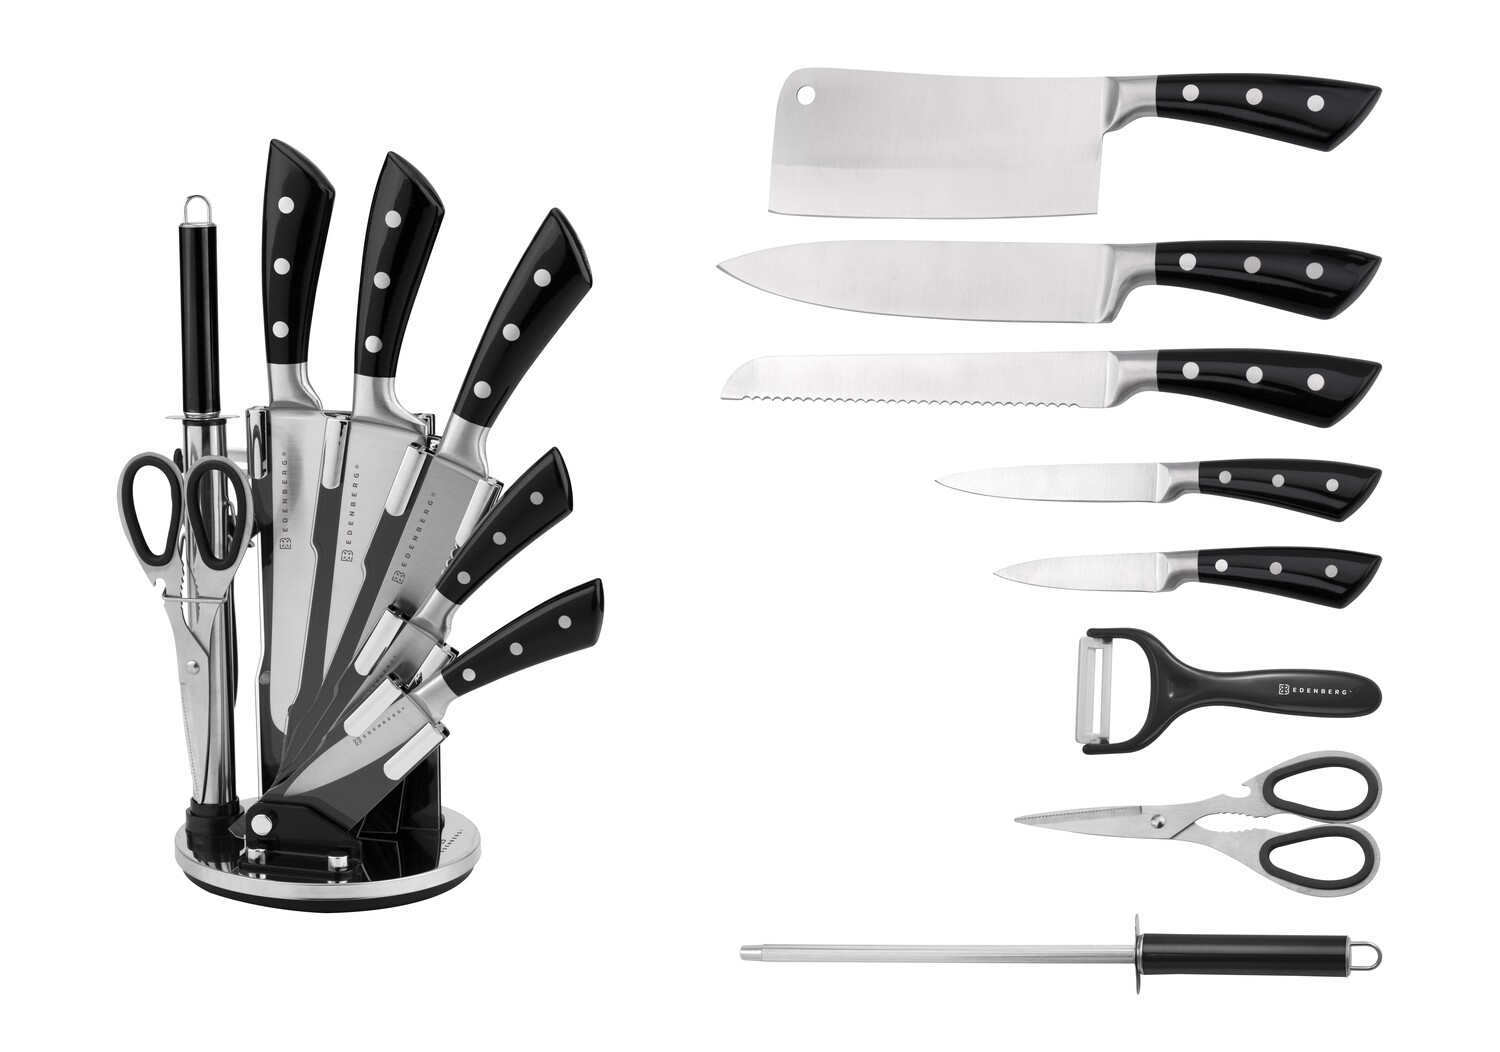 Edenberg 9pcs Knife Set with Acrylic Stand, Rubber Handle w/3 Dots In 3 Solid Colors : Black, Red, Grey EB-3619